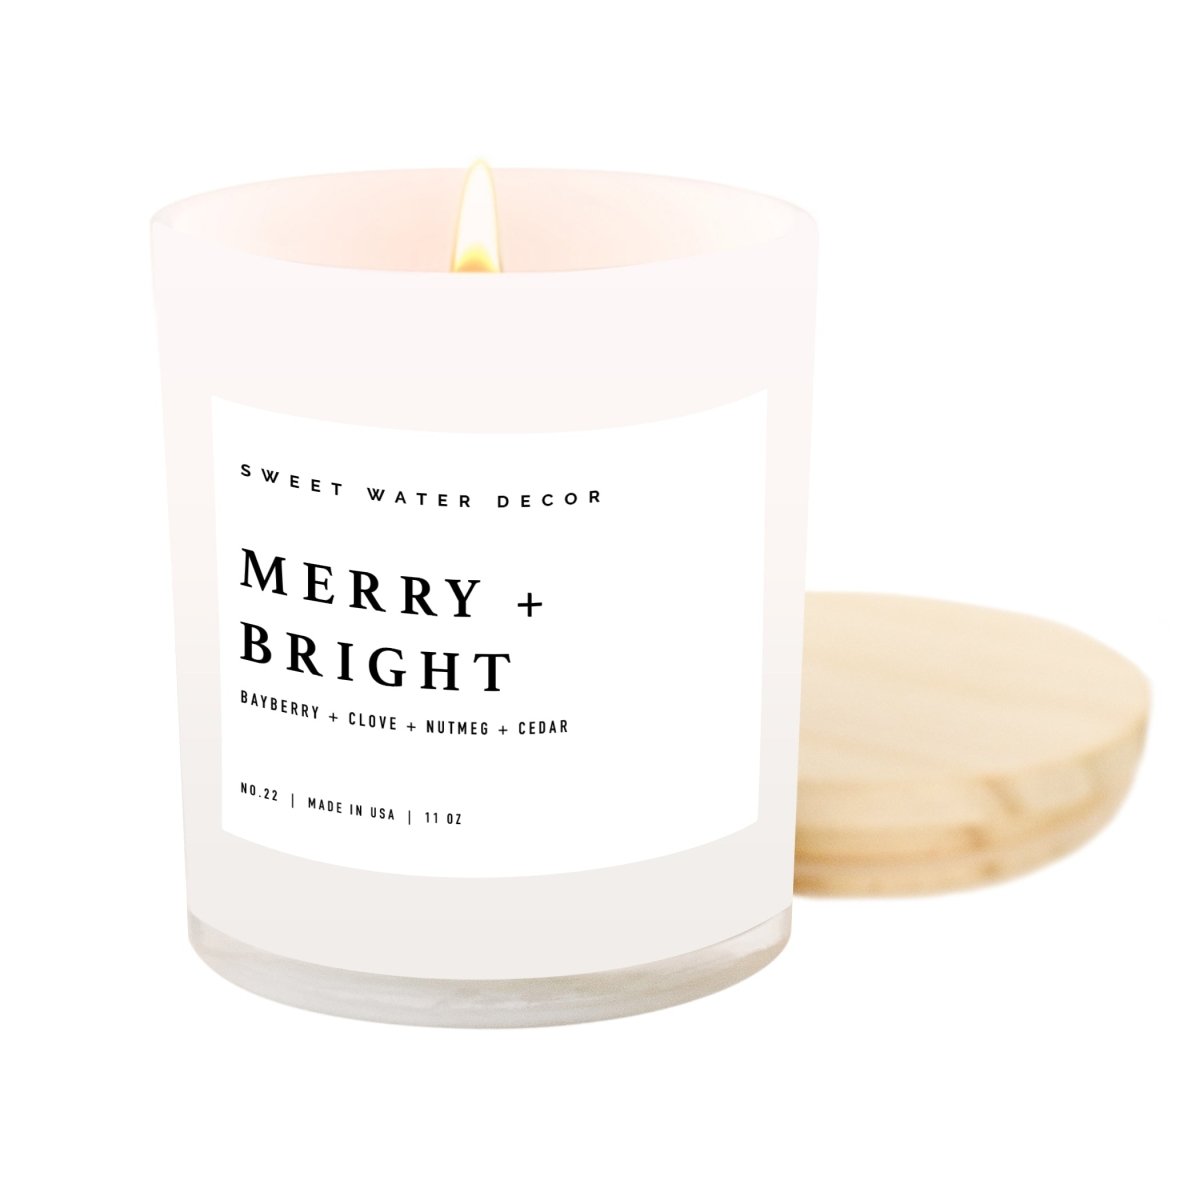 Sweet Water Decor Merry + Bright Soy Candle - White Jar - 11 oz - lily & onyx